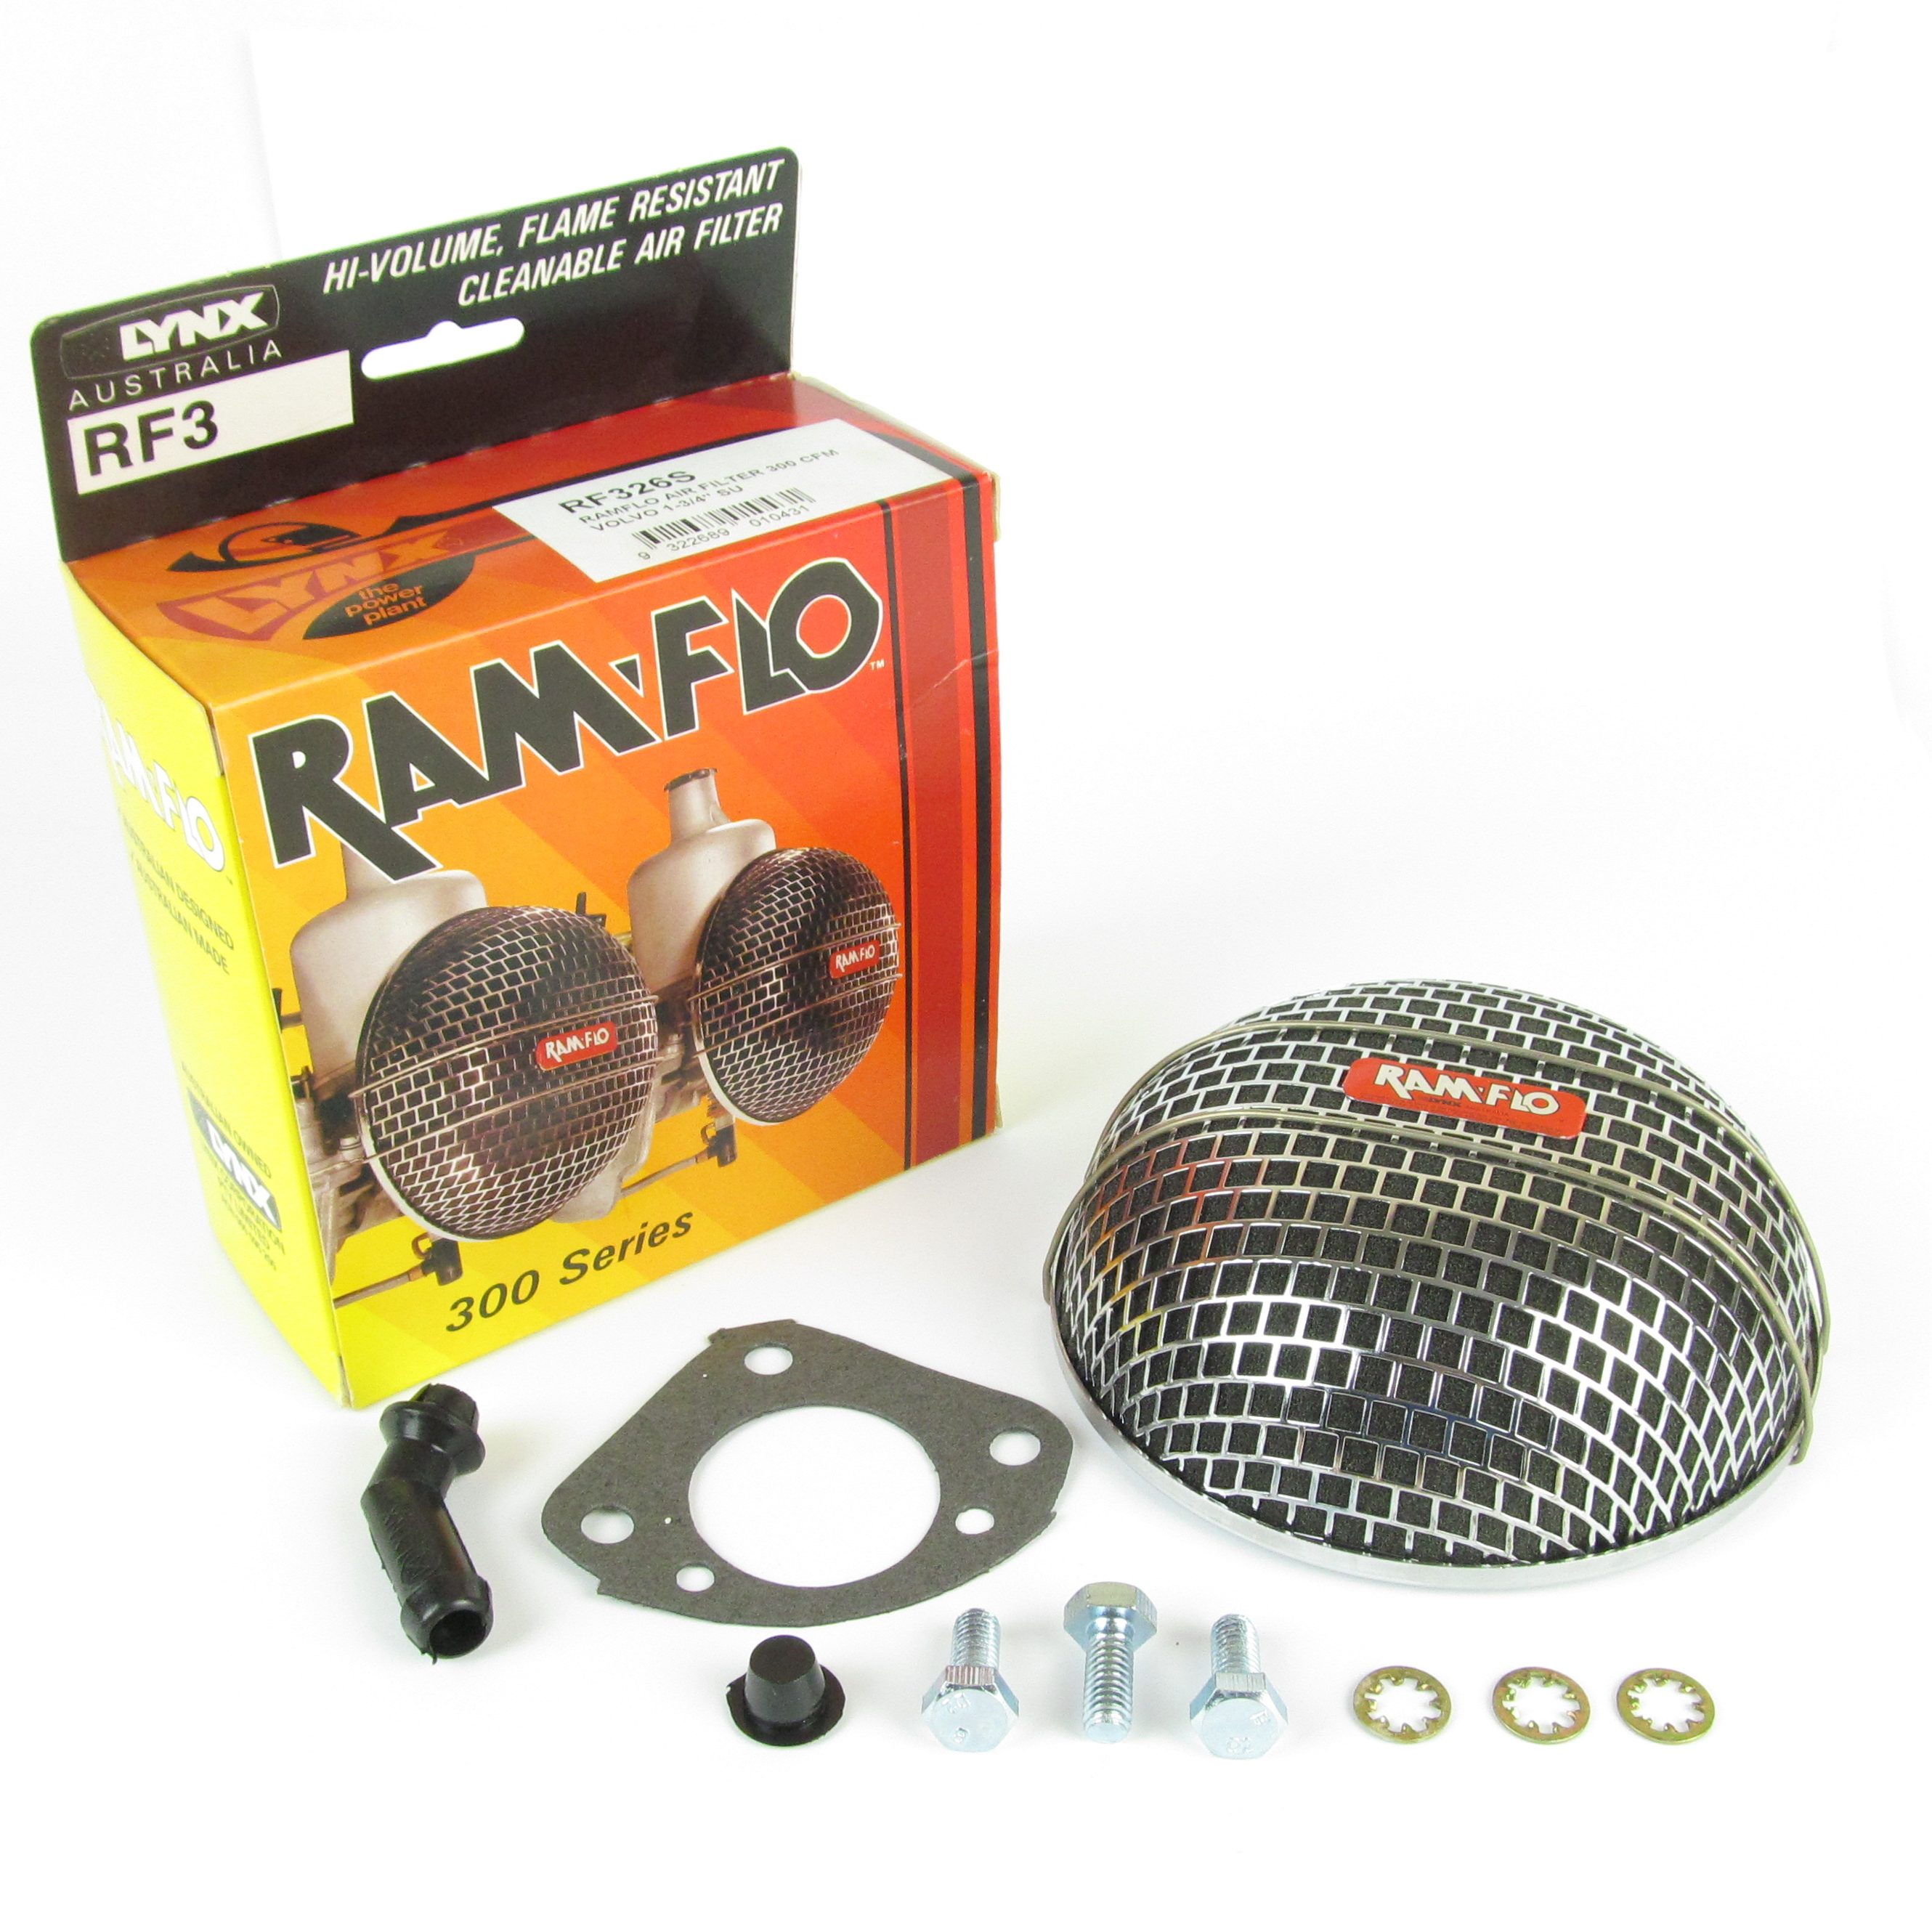 LYNX RAMFLO Air filter Kit for SU HS6 1¾” Carburettor/Carb Volvo P1800 & P122S